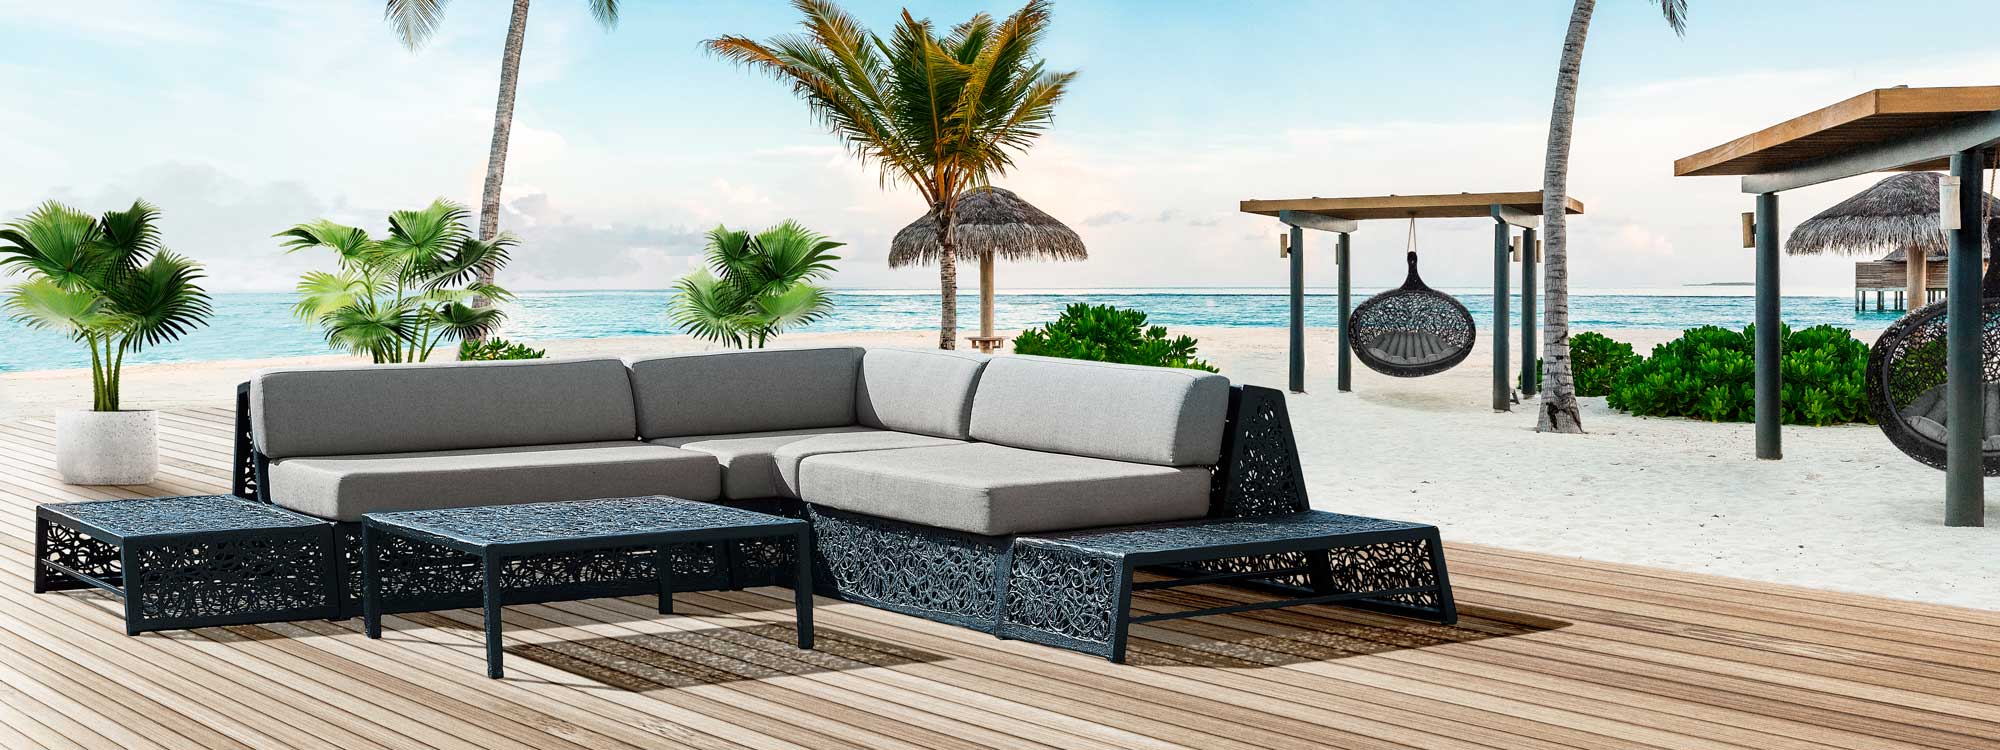 Image of Bios Lounge furniture in black with grey cushions by Unknown Nordic, with palms and Bios Hide swing seats in background